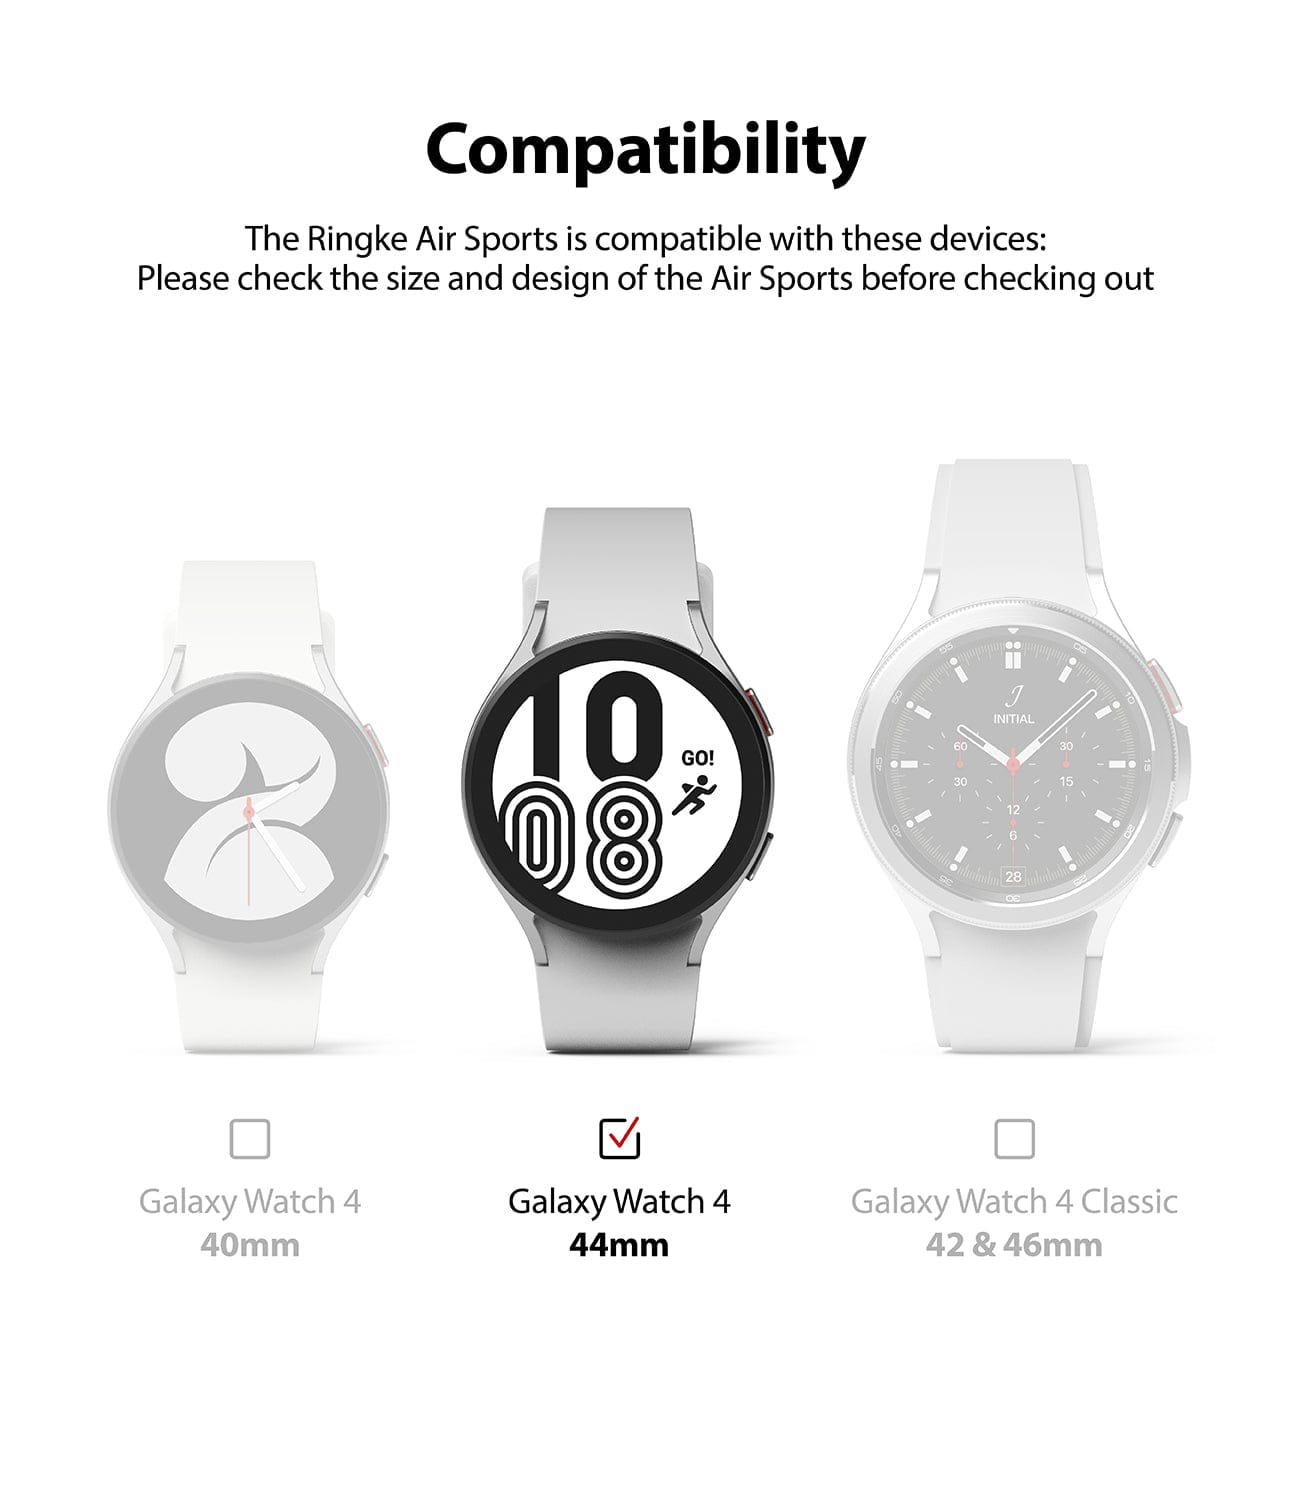 Compatible exclusively with the Galaxy Watch 4 44mm.